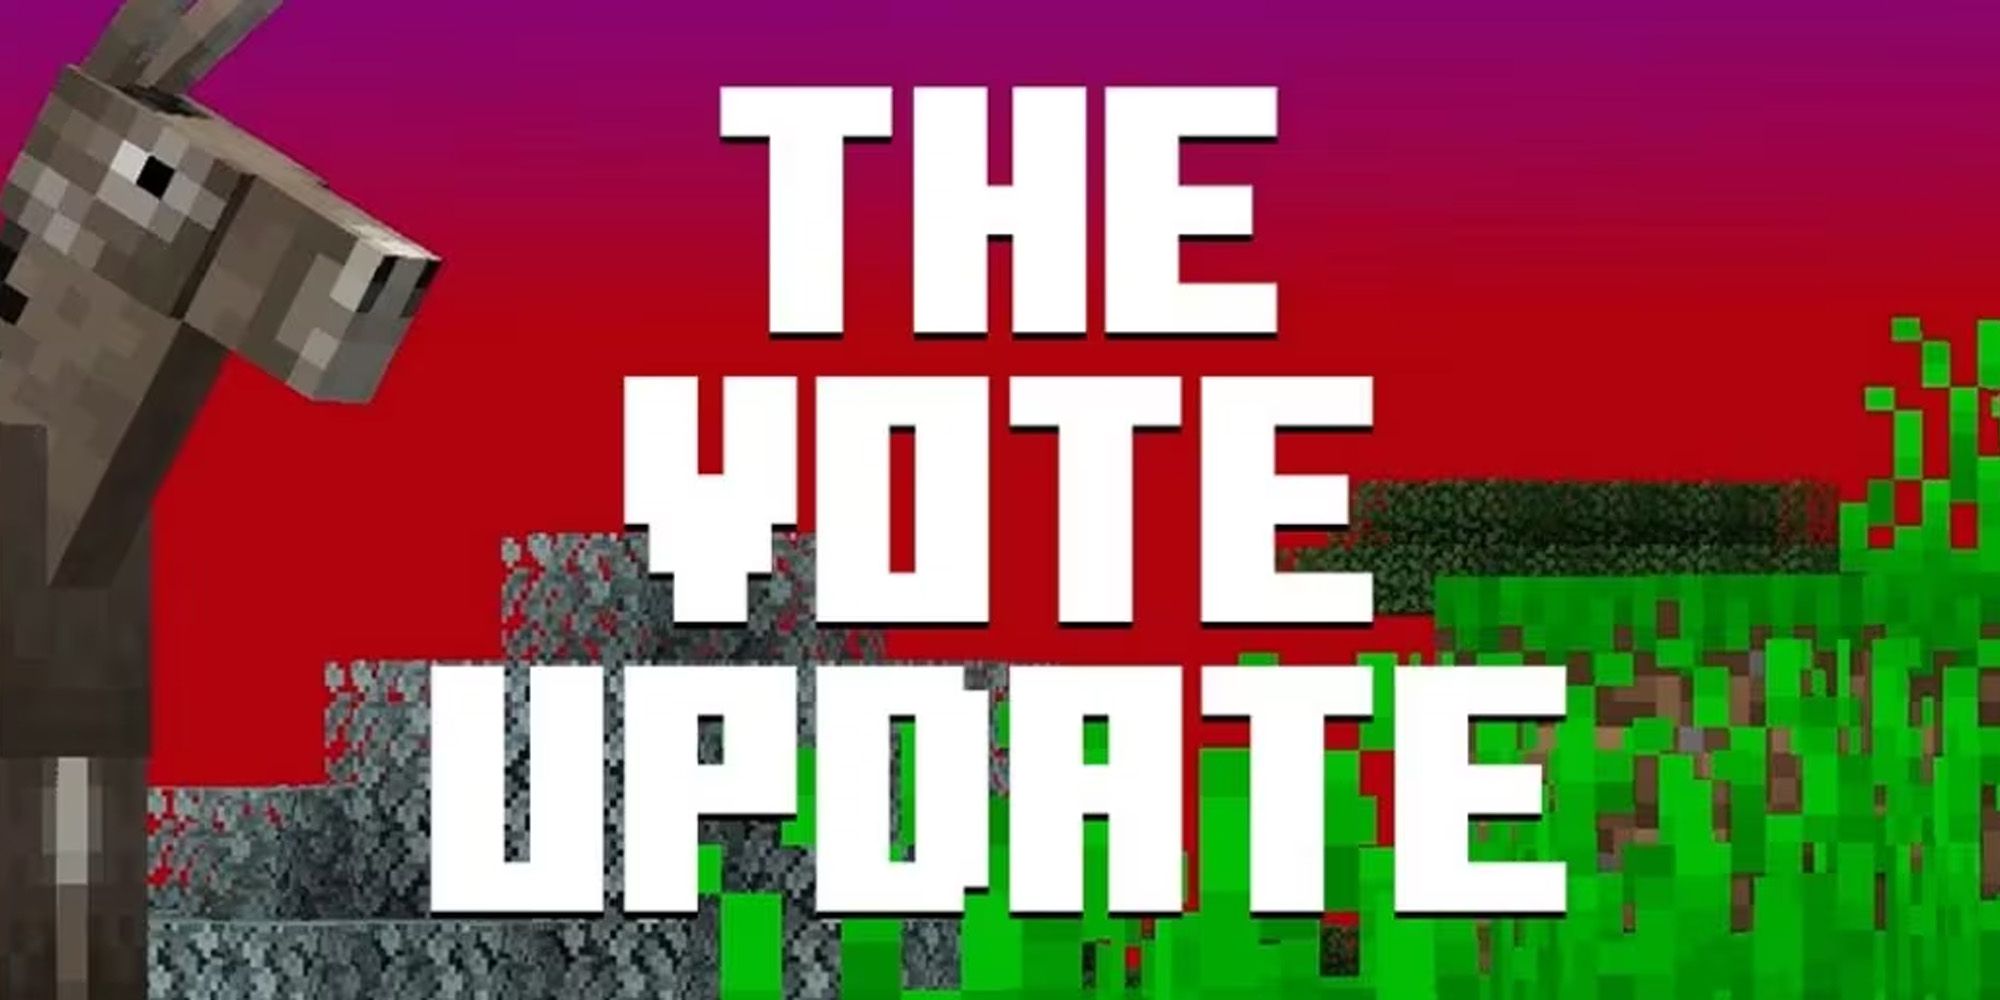 Banner image for Minecraft April Fools Day 2023 "The Vote Updaet" showing a donkey and a deep red sky.